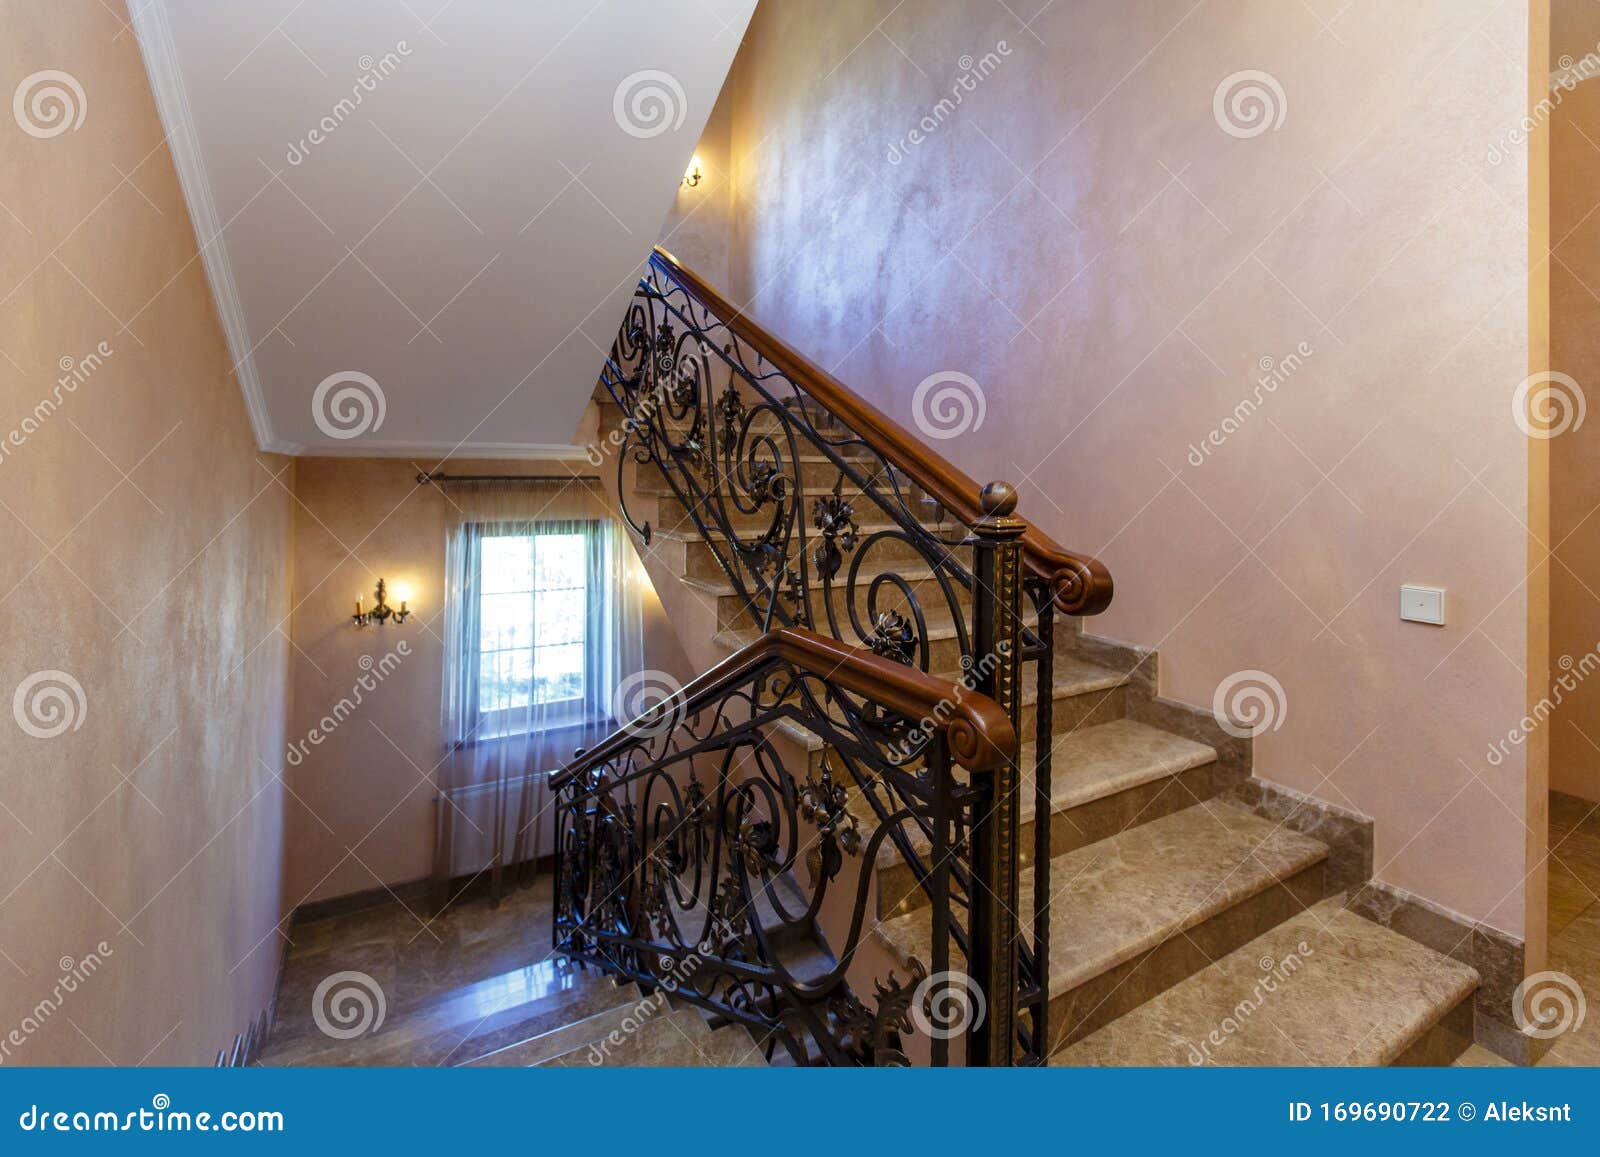 A Rich And Beautiful Staircase With Wrought Iron Railings And A Wooden Handrail Leads To A Landing With Two Wooden Doors Stock Photo Image Of Architecture Hall 169690722